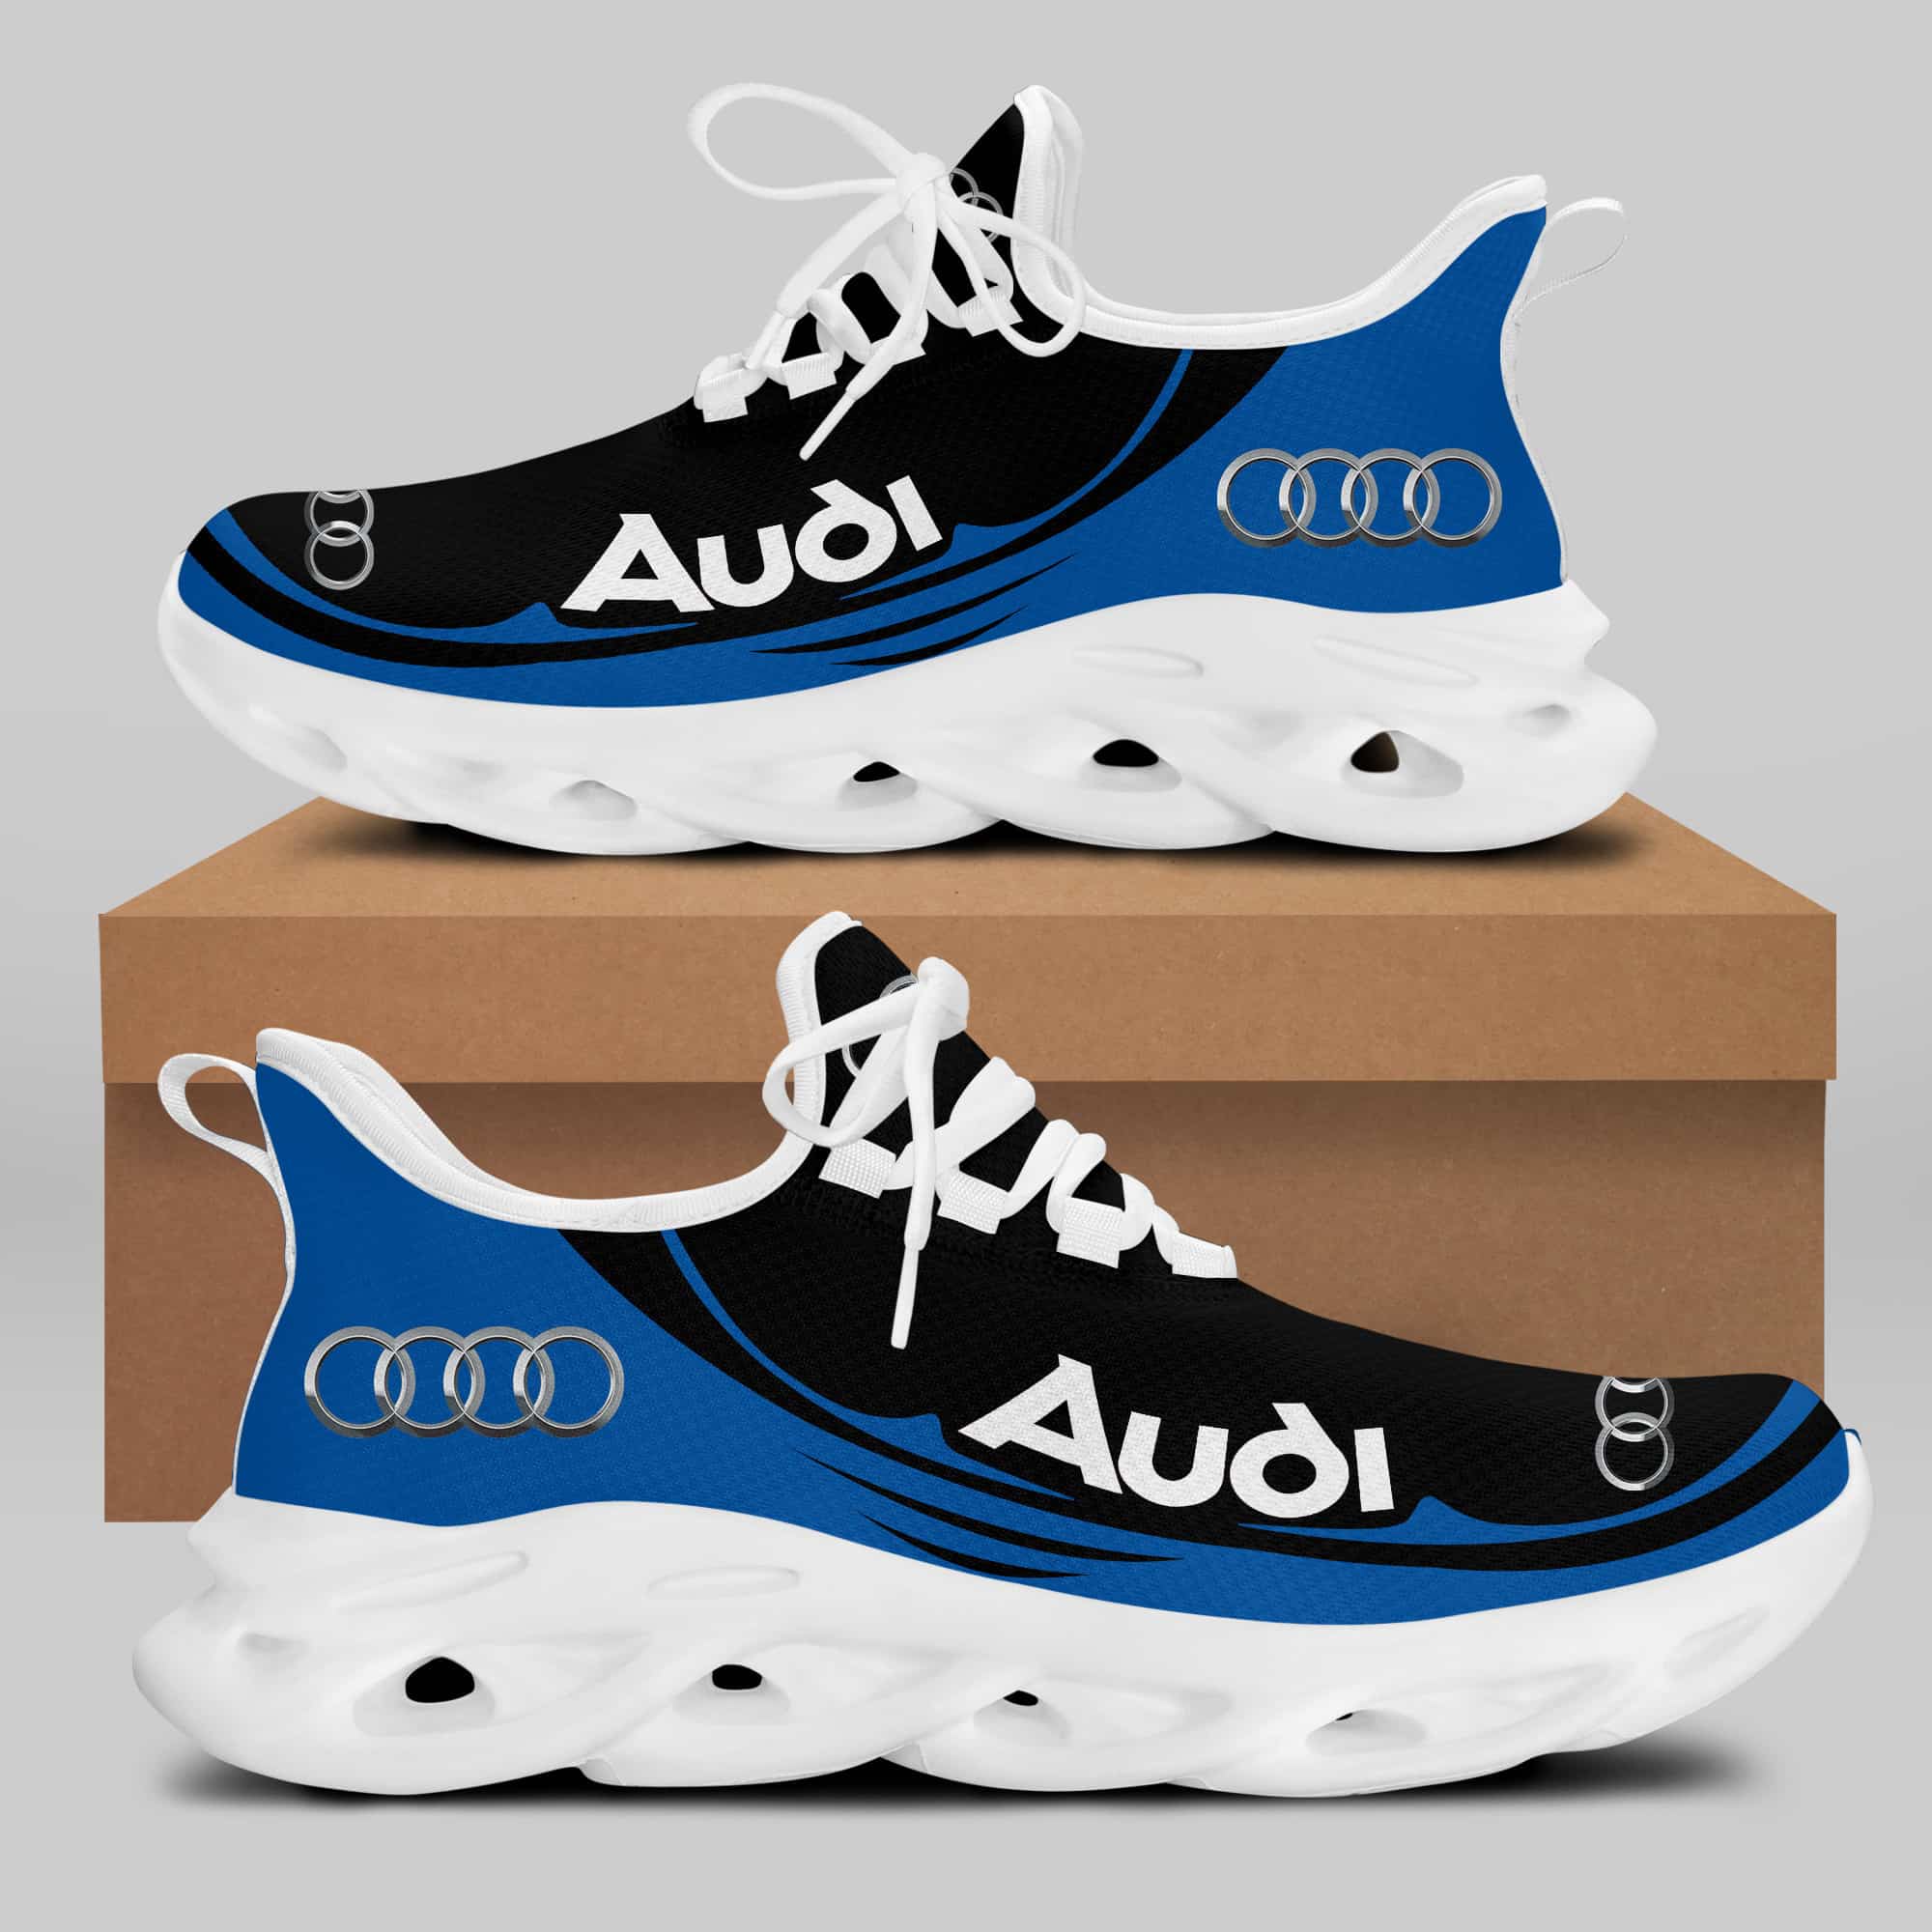 Audi Sport Running Shoes Max Soul Shoes Sneakers Ver 44 2